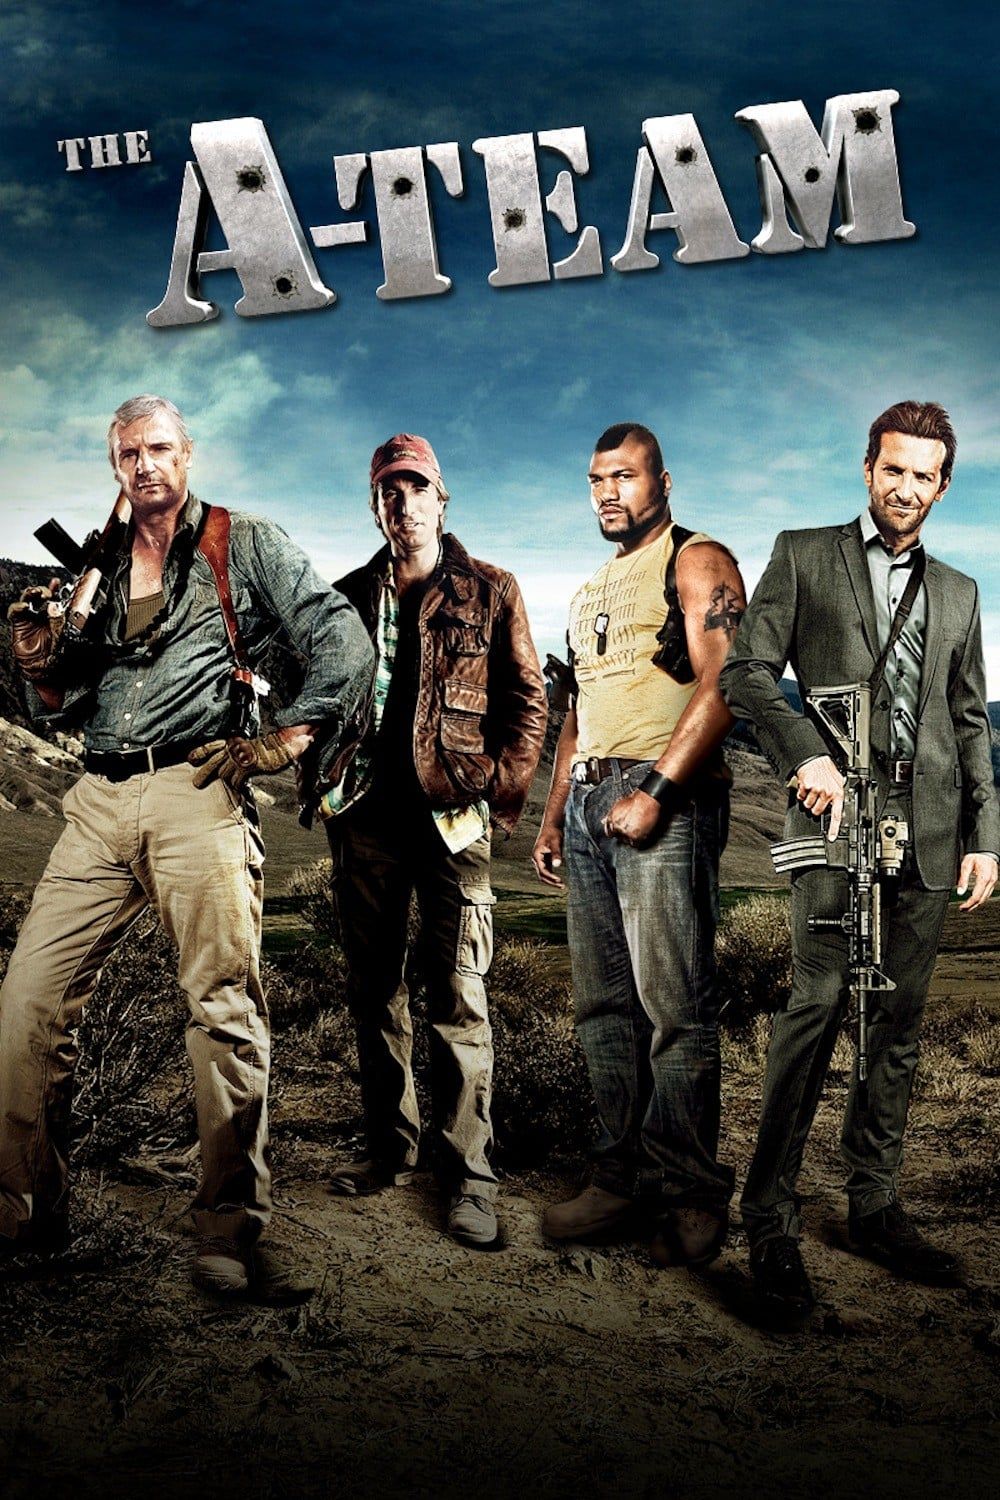 The A-Team movie poster.